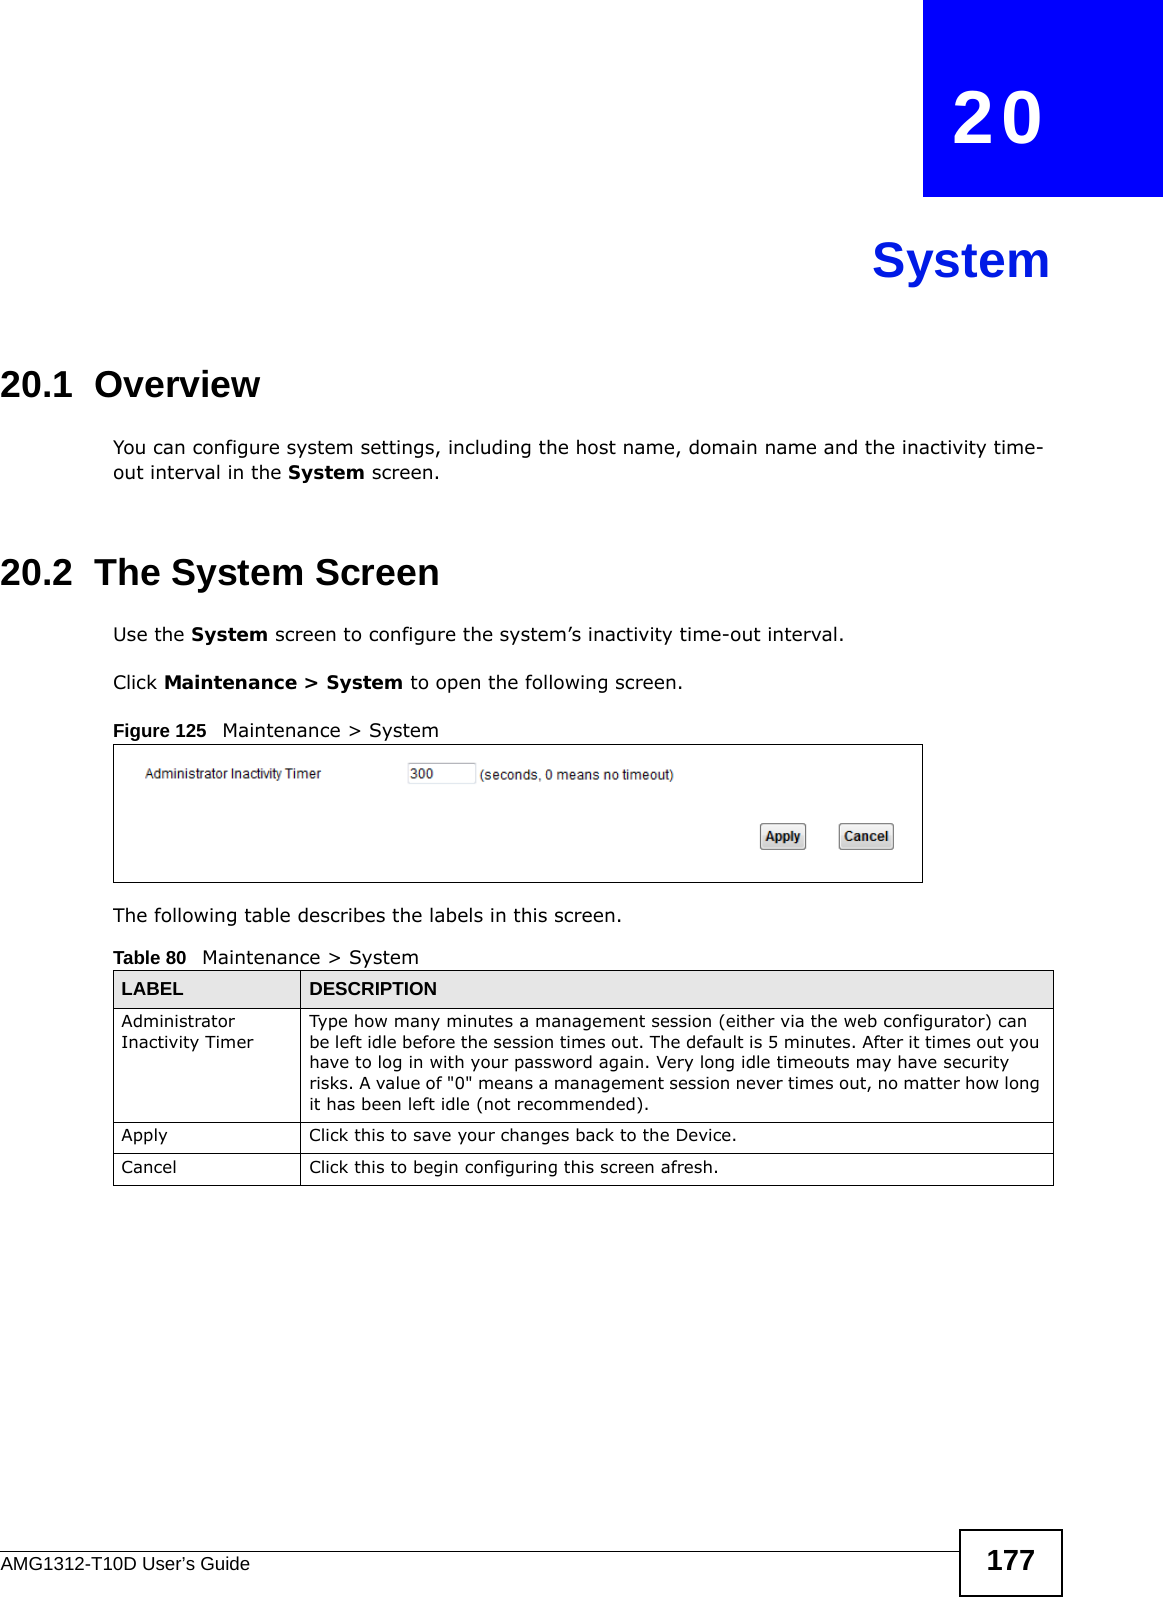 AMG1312-T10D User’s Guide 177CHAPTER   20System20.1  Overview You can configure system settings, including the host name, domain name and the inactivity time-out interval in the System screen.    20.2  The System ScreenUse the System screen to configure the system’s inactivity time-out interval.Click Maintenance &gt; System to open the following screen. Figure 125   Maintenance &gt; System The following table describes the labels in this screen.  Table 80   Maintenance &gt; SystemLABEL DESCRIPTIONAdministrator Inactivity TimerType how many minutes a management session (either via the web configurator) can be left idle before the session times out. The default is 5 minutes. After it times out you have to log in with your password again. Very long idle timeouts may have security risks. A value of &quot;0&quot; means a management session never times out, no matter how long it has been left idle (not recommended).Apply Click this to save your changes back to the Device.Cancel Click this to begin configuring this screen afresh.